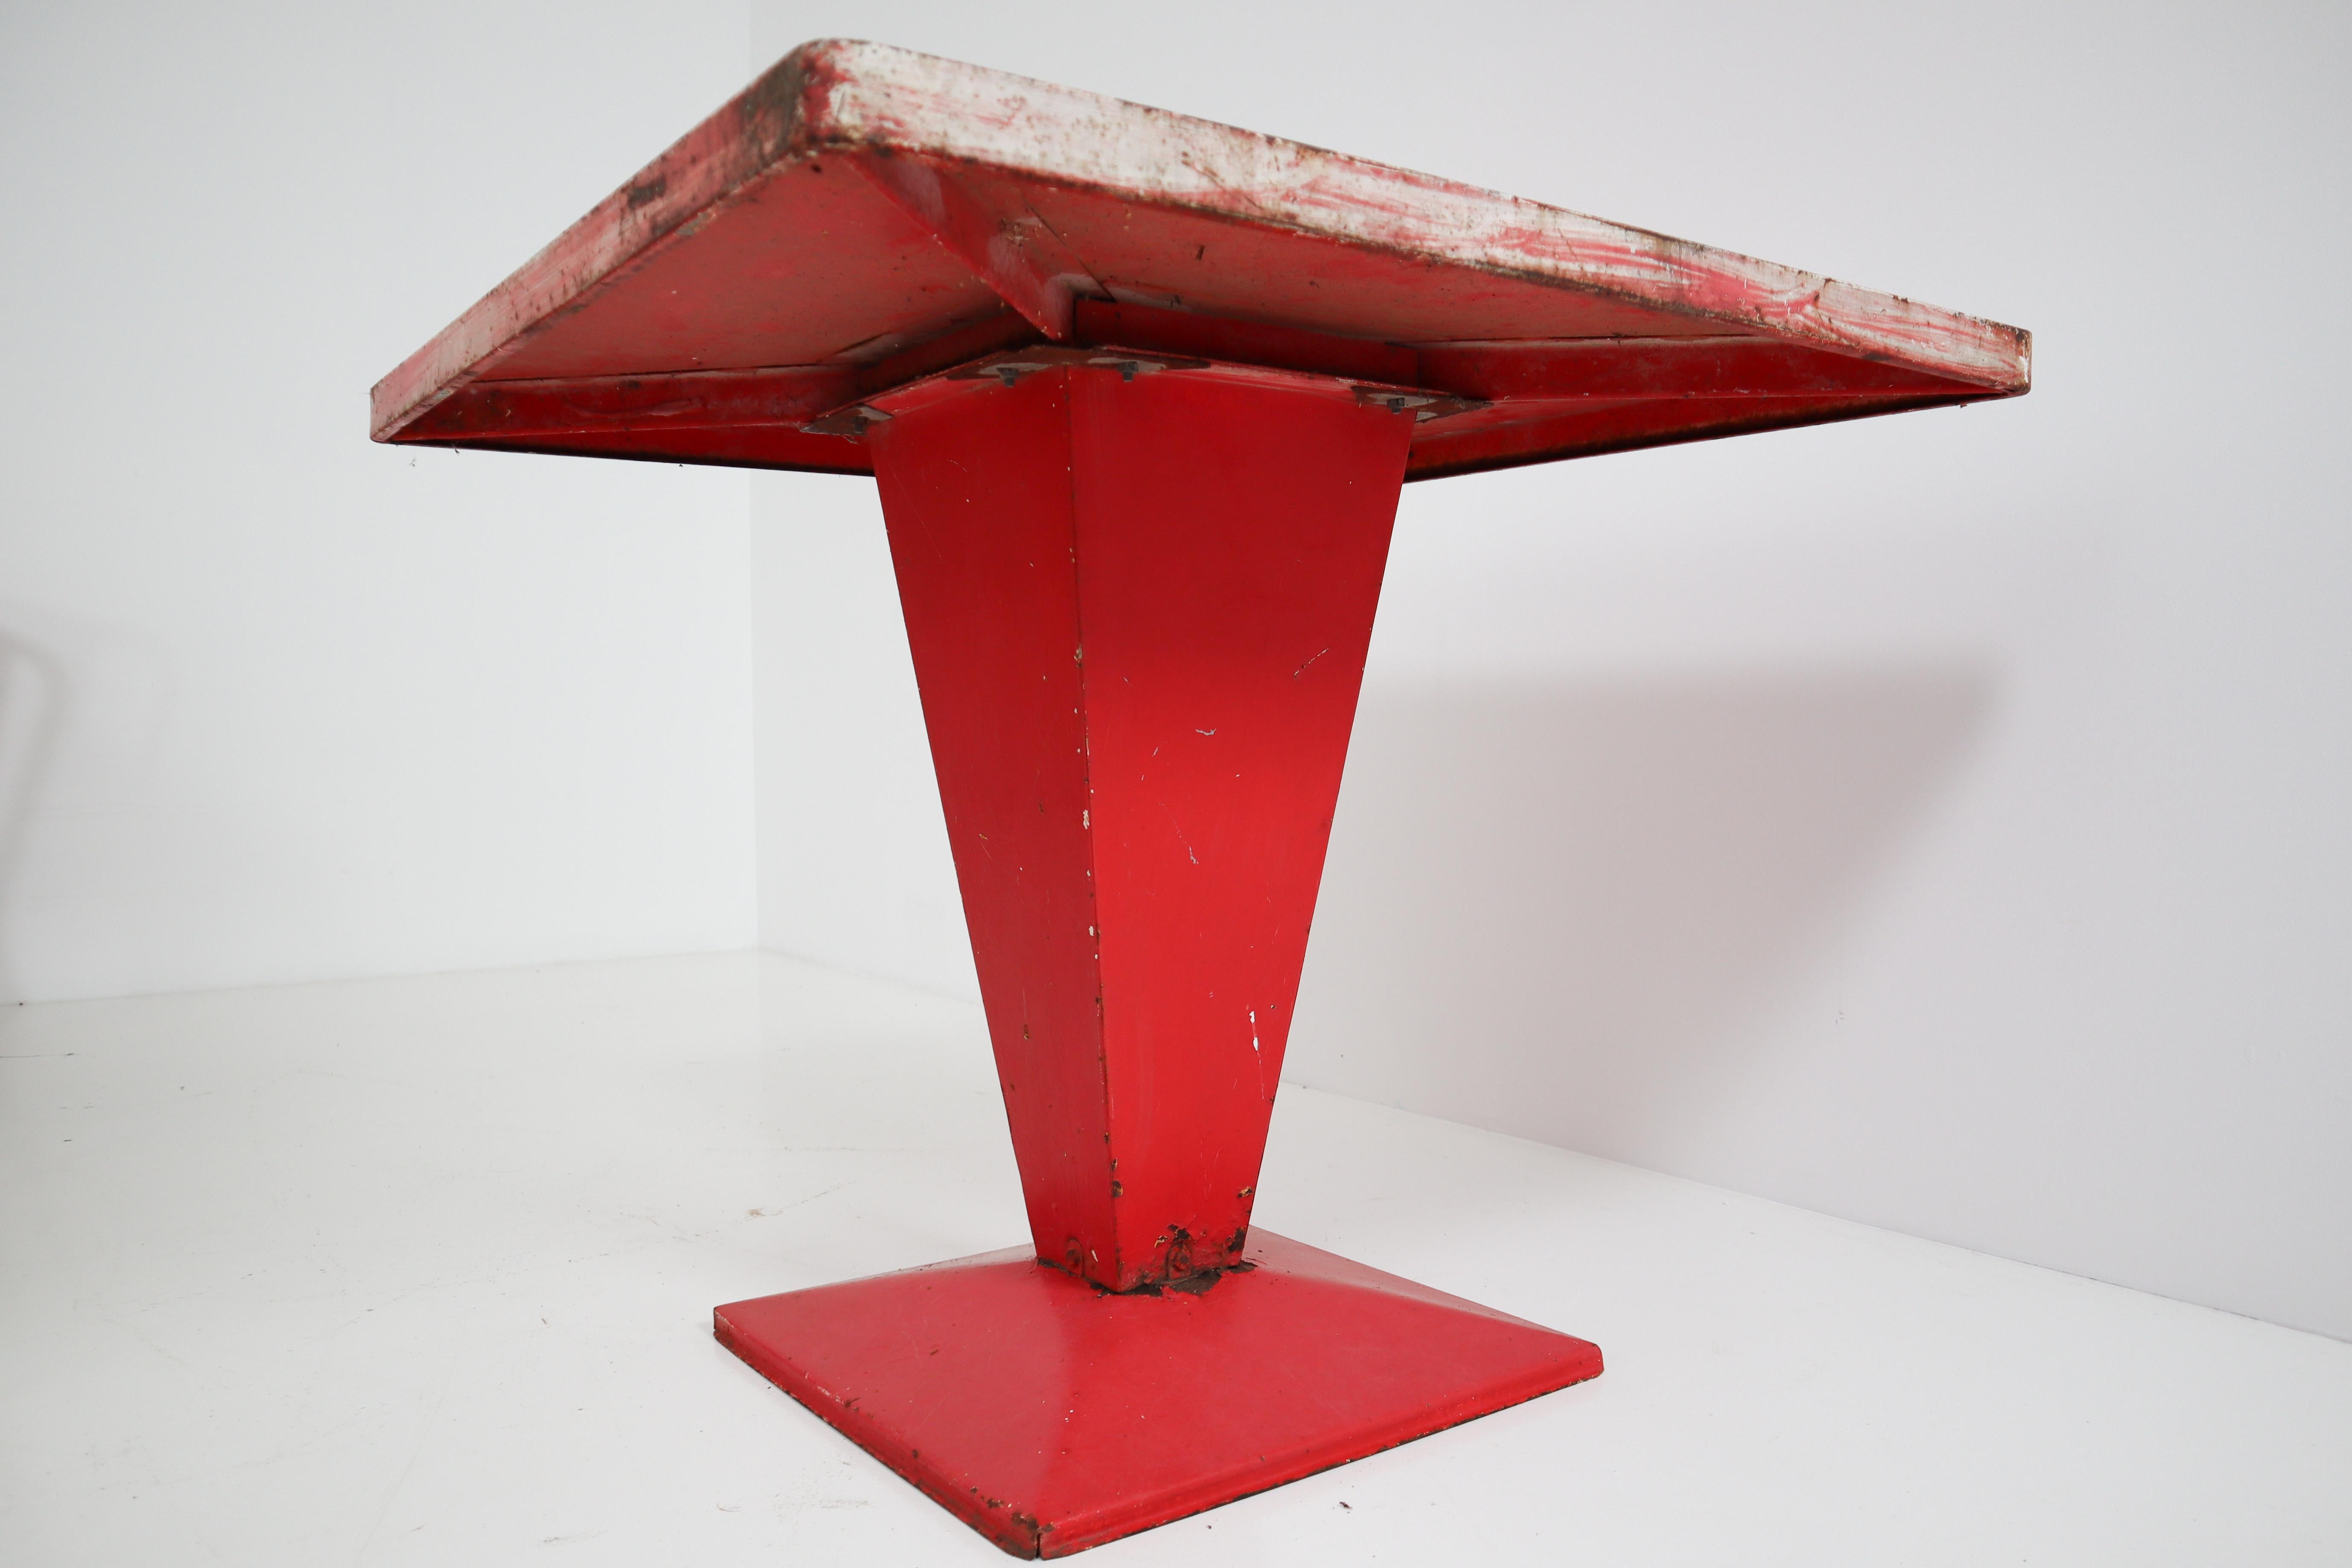 This red/white Tolix table with original patina is extremely rare. The squared base is in fact a typical feature that always characterizes the squared structure of the bistro table known as 'Cube' table. The contrast created in this piece of